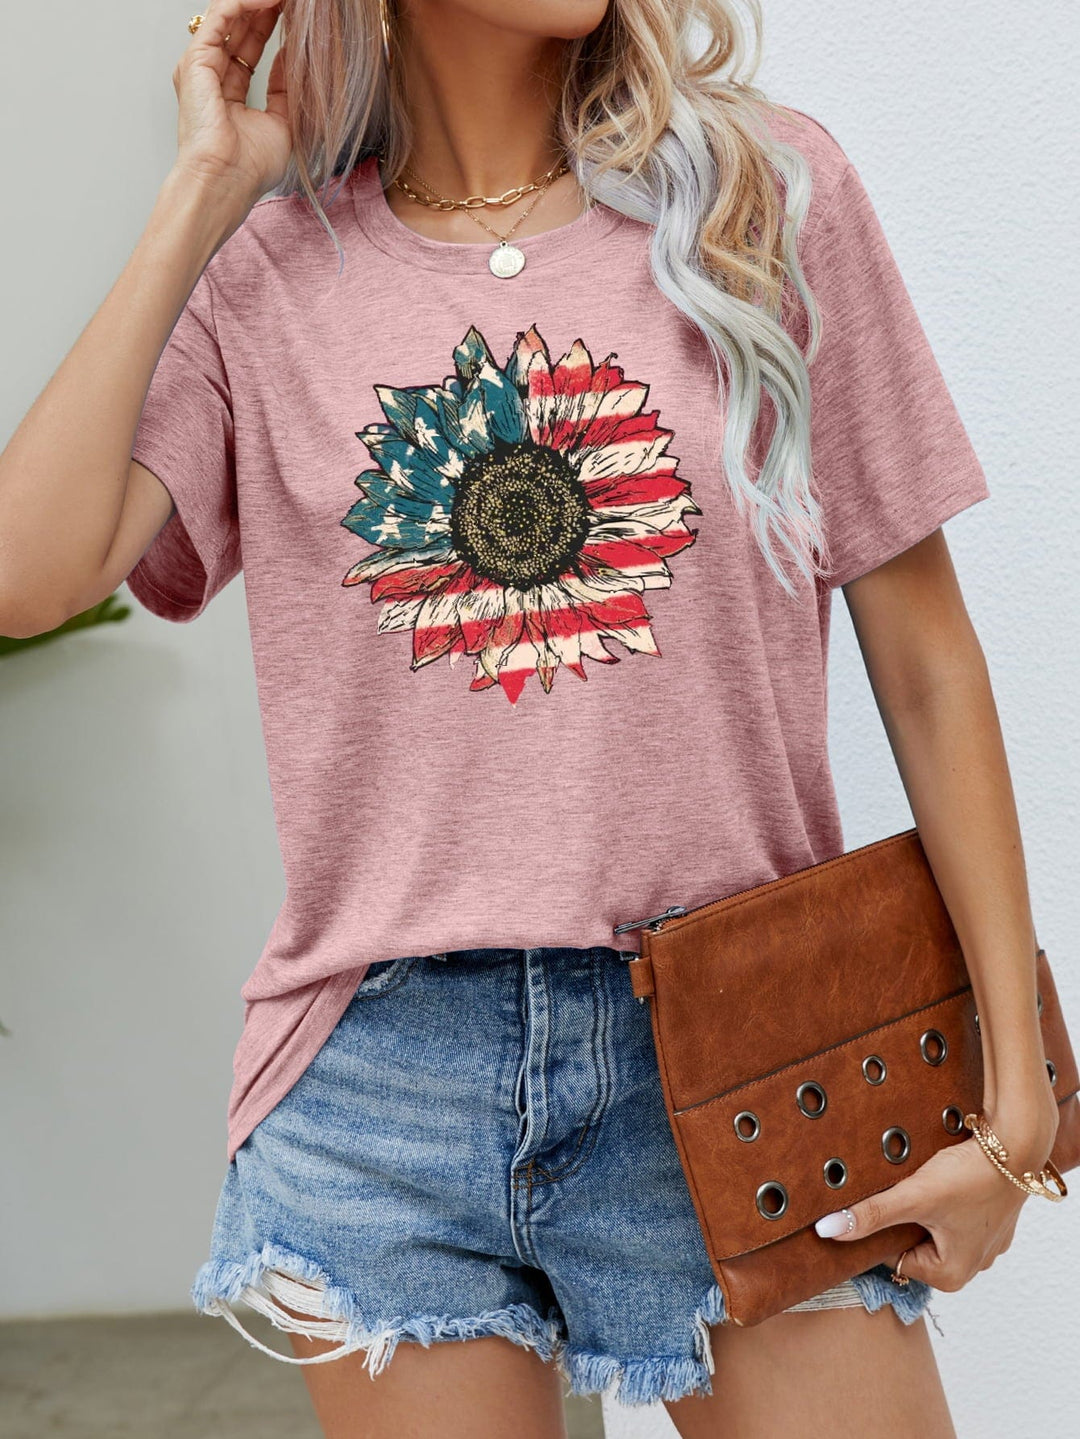 The802Gypsy shirts and tops Blush Pink / S ❤️GYPSY-US Flag Flower Graphic Tee